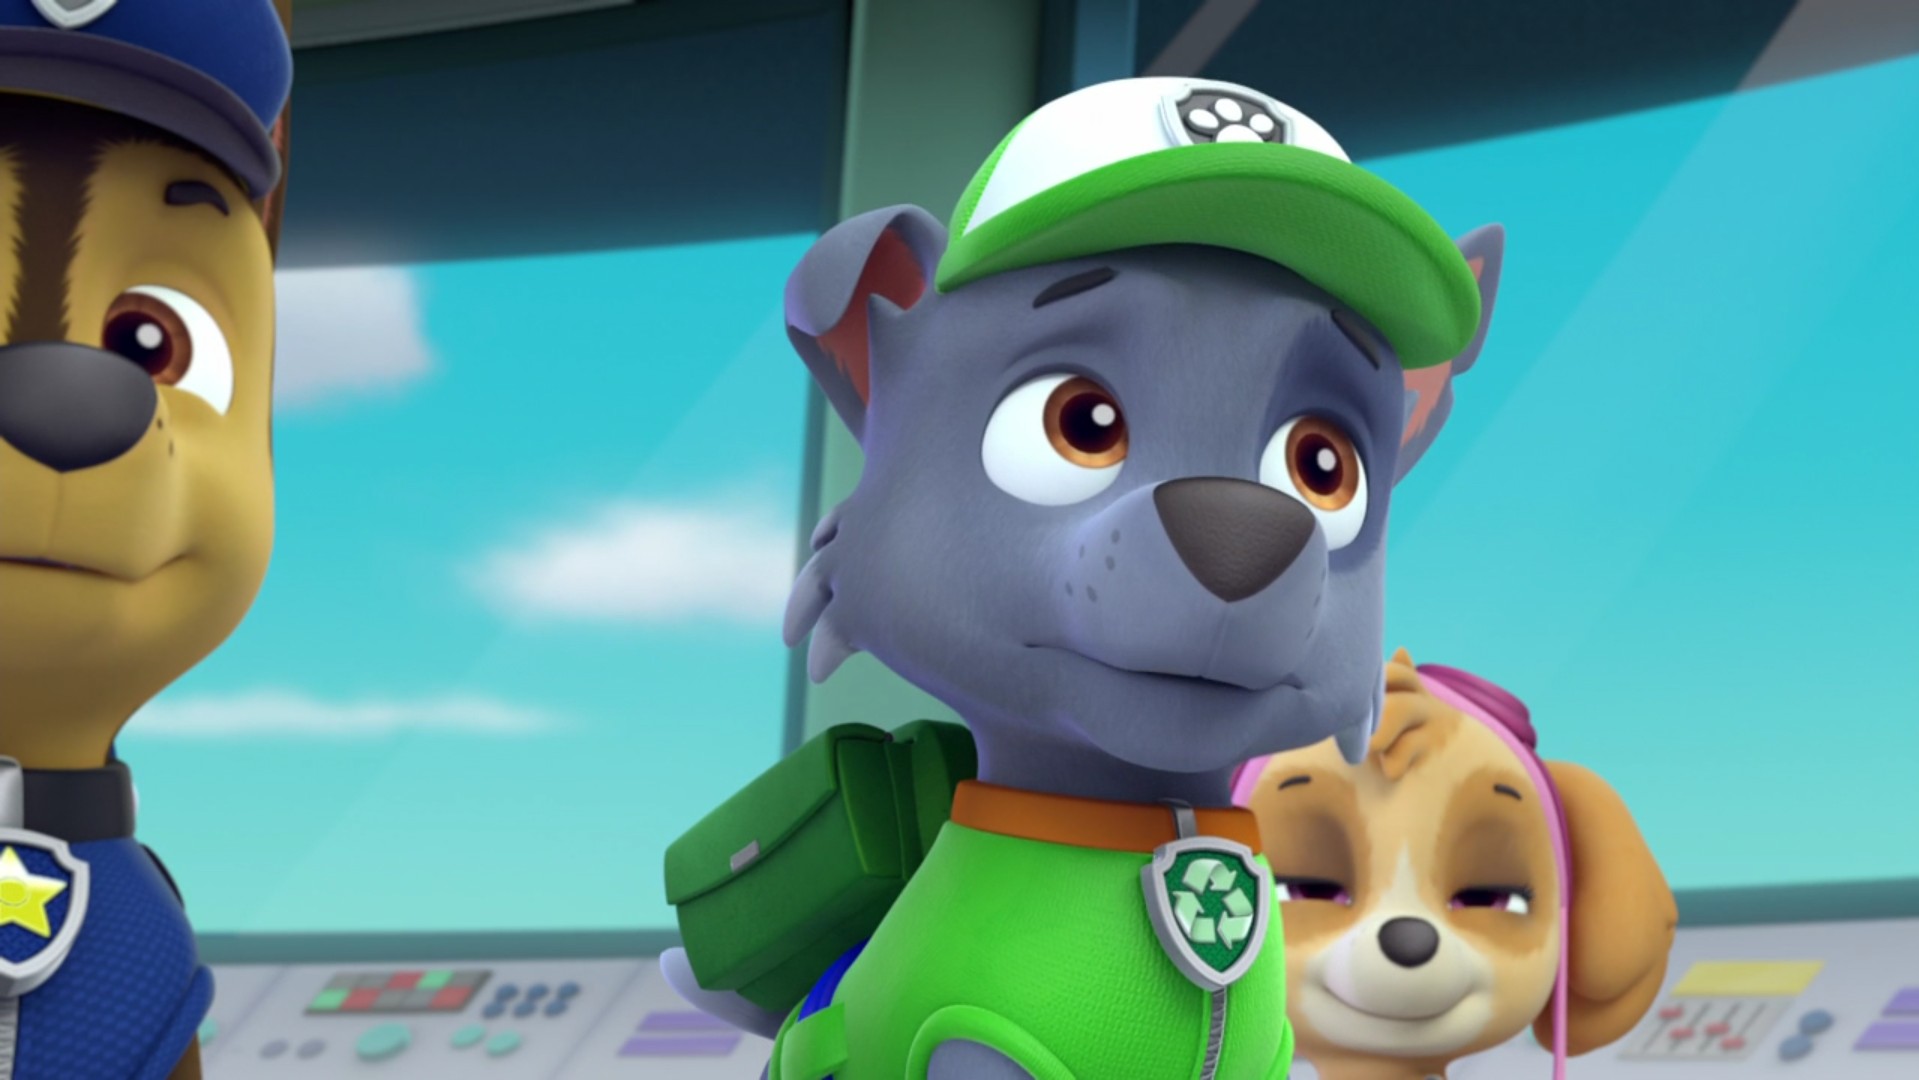 Fil Isolere Quilt PAW Patrol on 4 on Twitter: "#PAWPatrol Season 2 (Episode 4A) - Pups save  the Diving Bell #Rocky https://t.co/1nVwjvtOeU" / Twitter